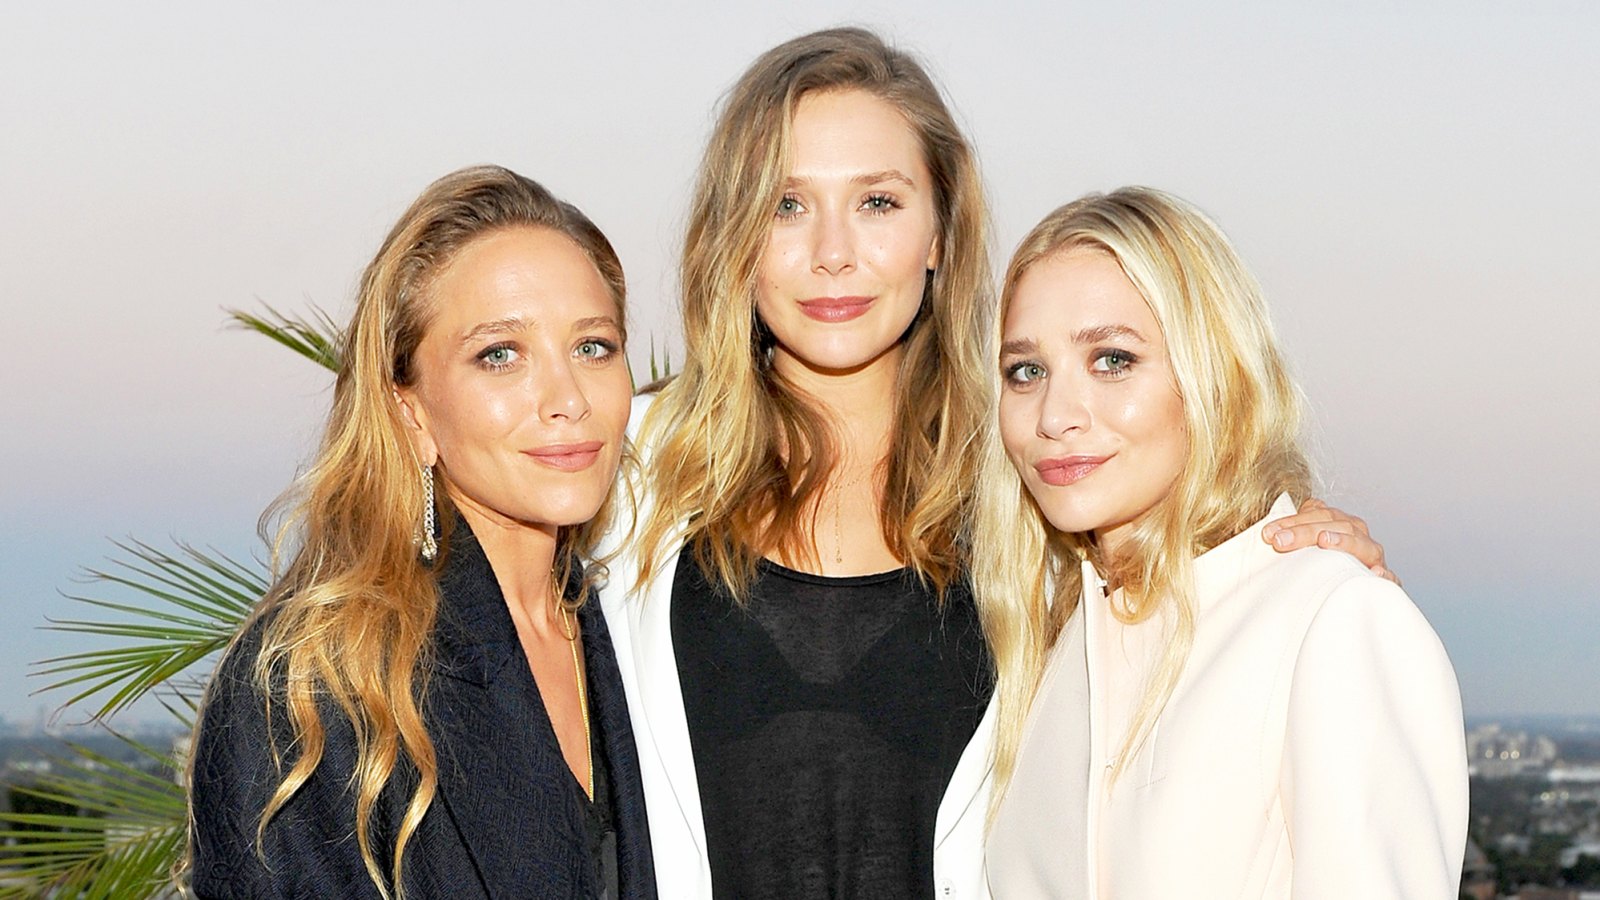 Mary-Kate Olsen, Elizabeth Olsen and Ashley Olsen attend Elizabeth and James Flagship Store Opening 2016 Celebration with InStyle at Chateau Marmont in Los Angeles, California.